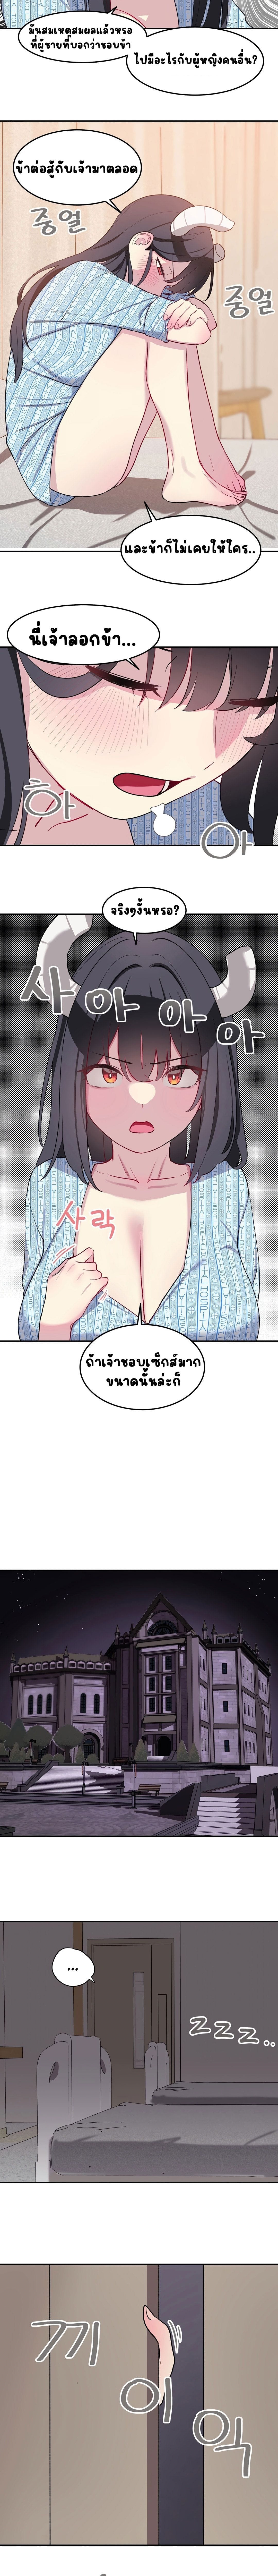 Hospitalized Life in Another World ตอนที่ 2 ภาพ 11